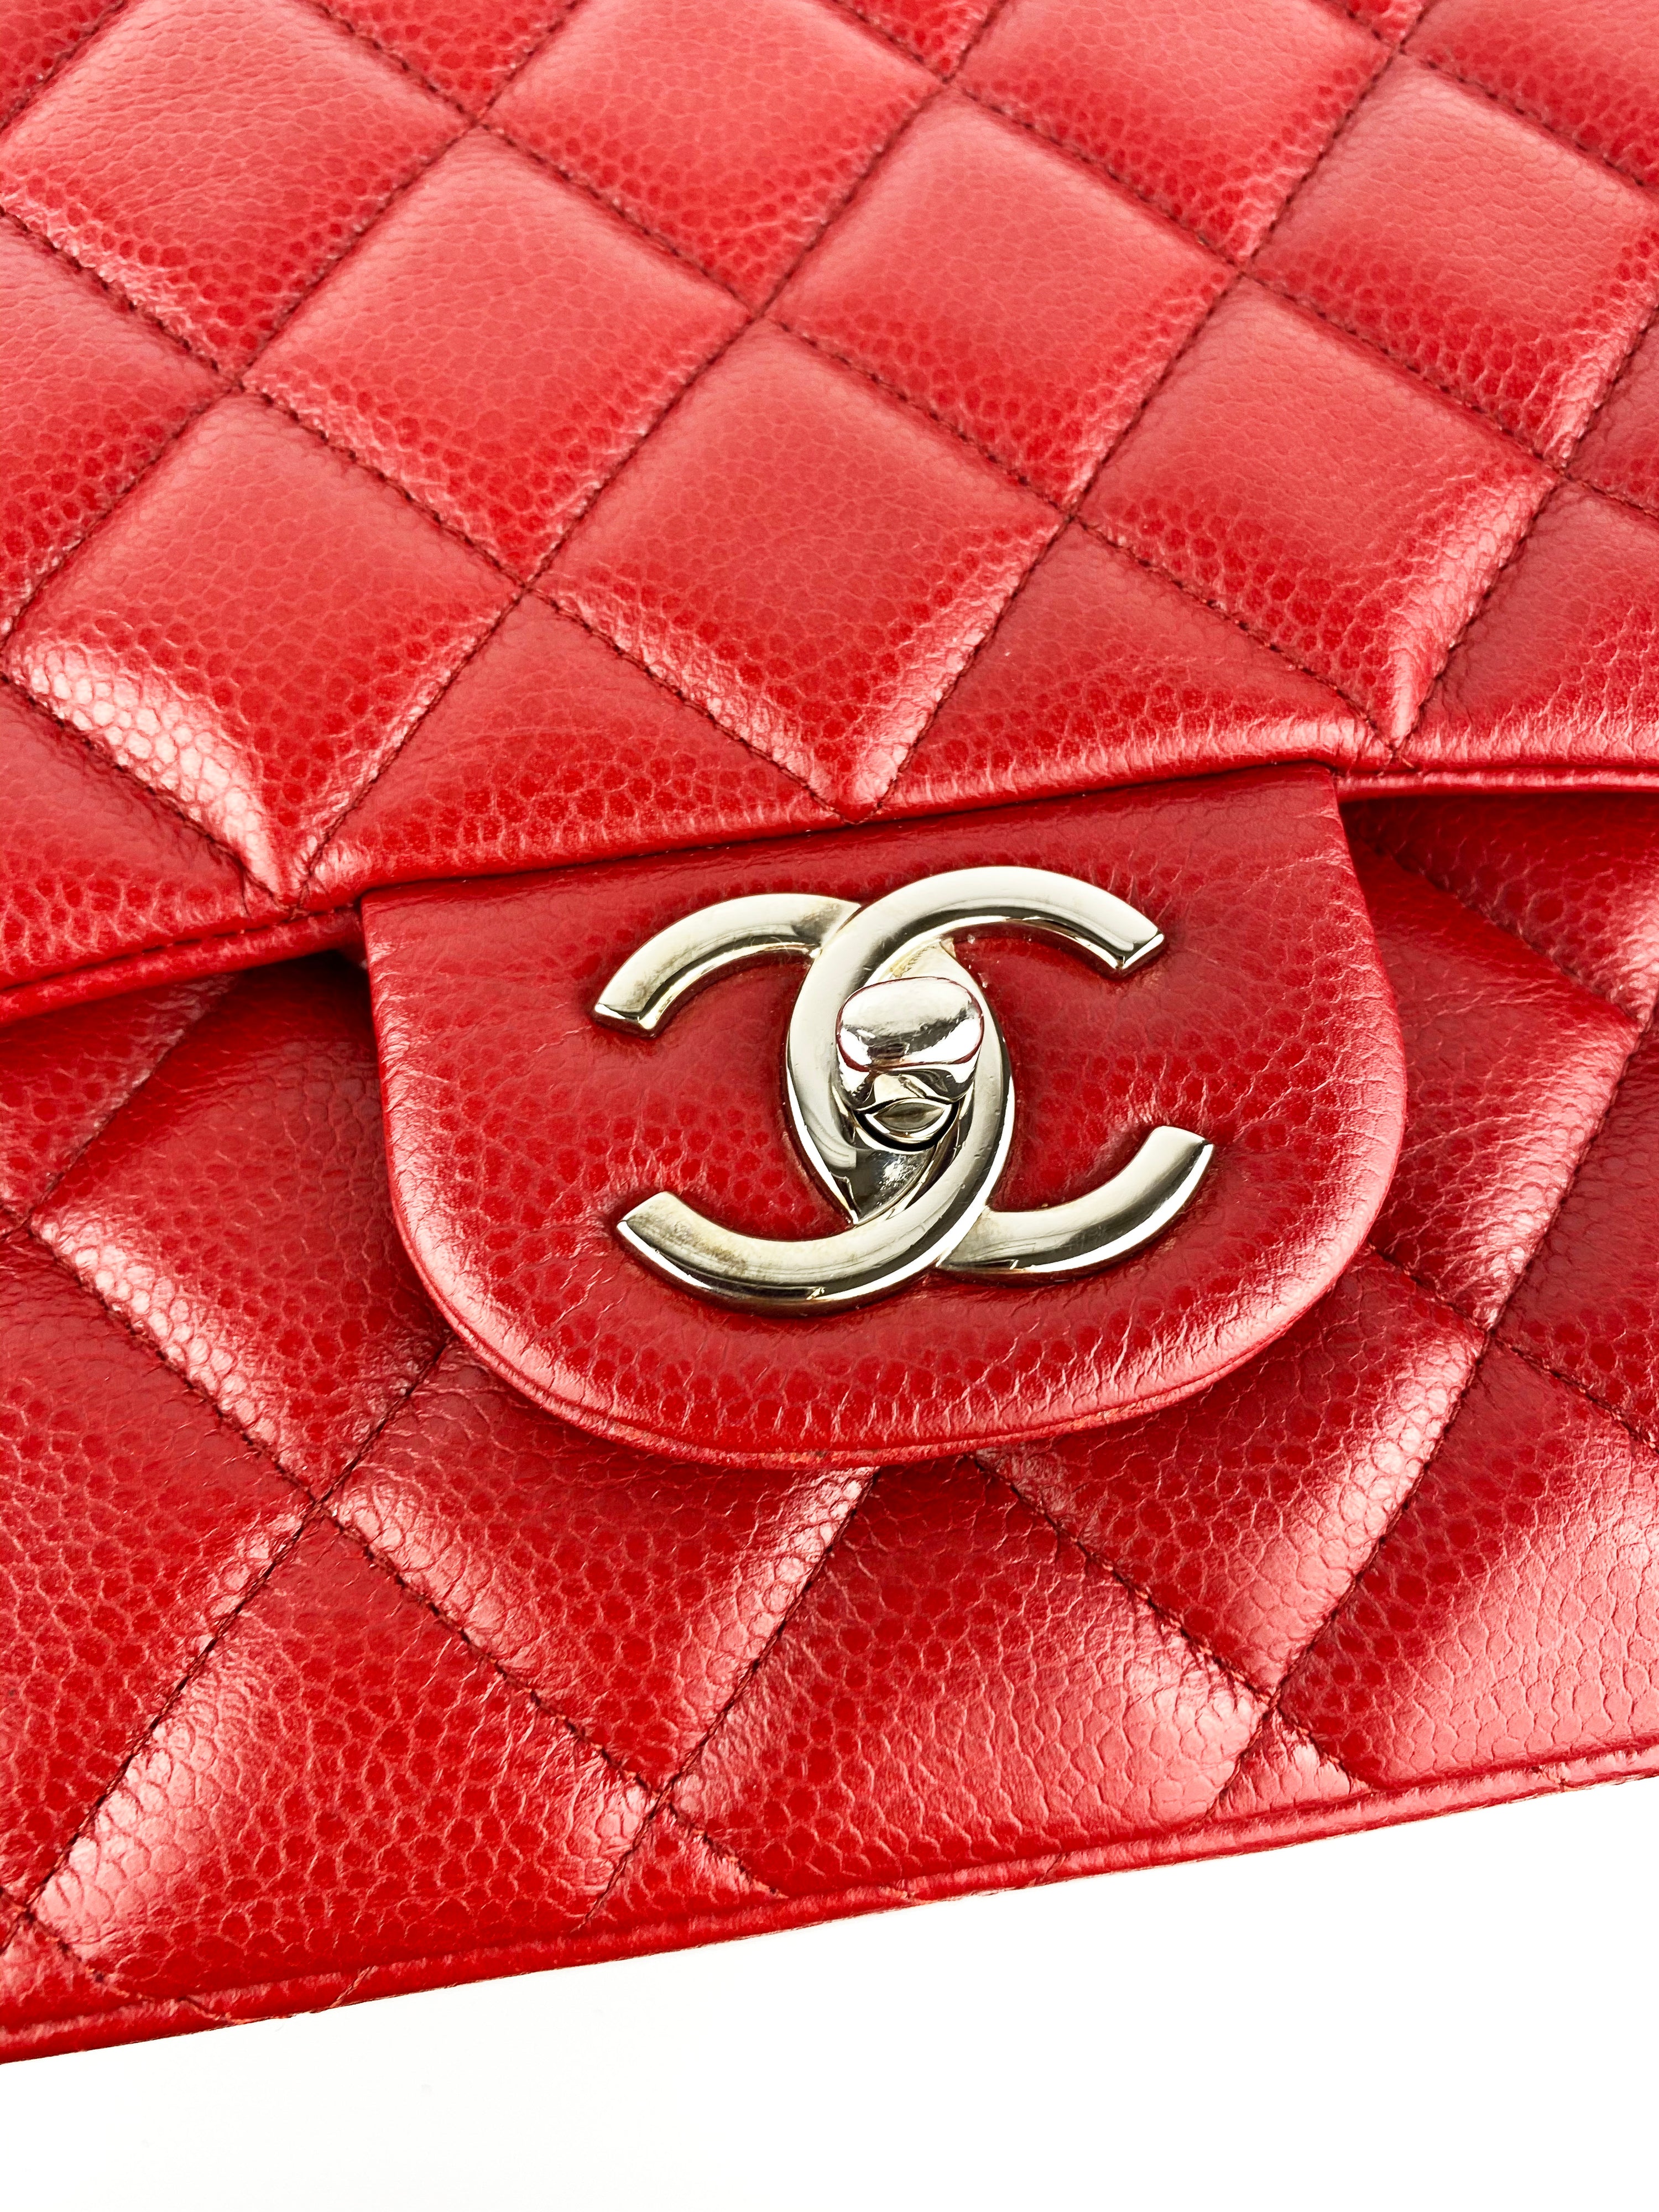 Chanel Red Maxi Classic Flap Bag